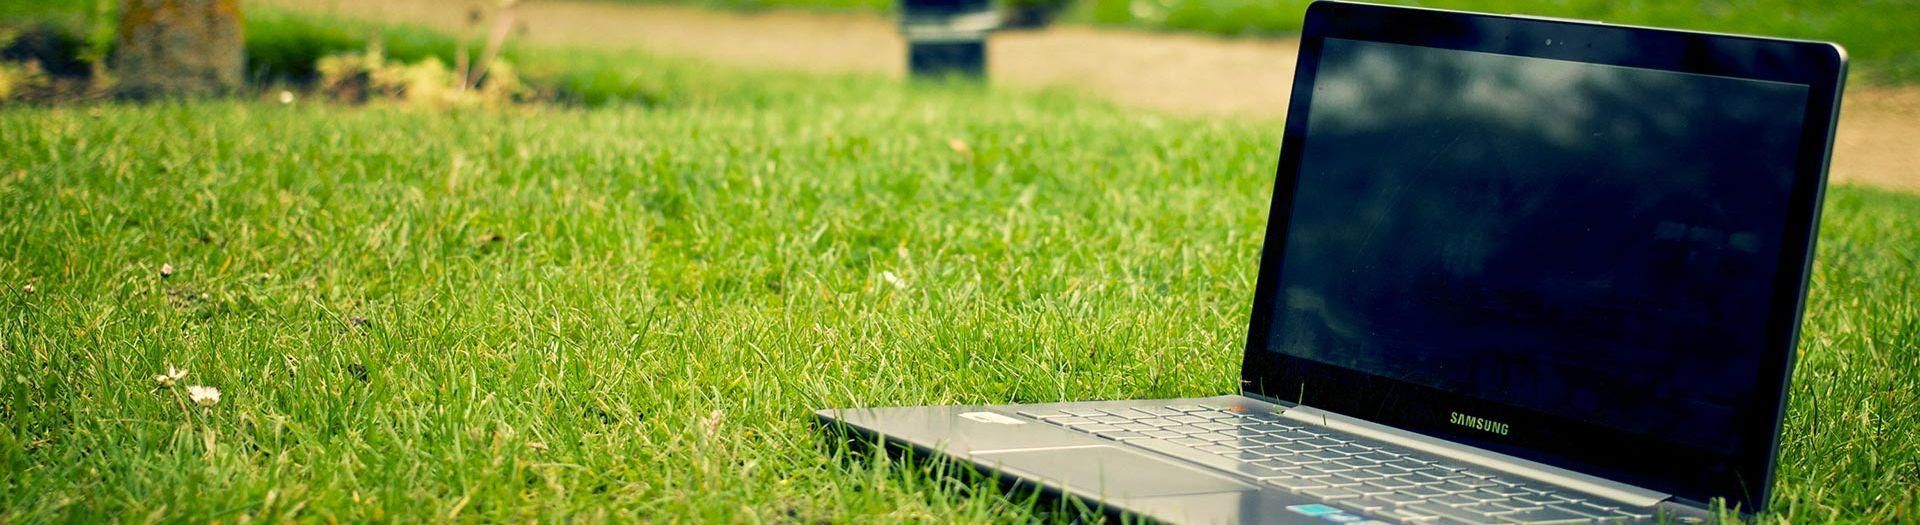 laptop-notebook-grass-meadow-1c6fa79c Transport | BRIGHT Software B.V.